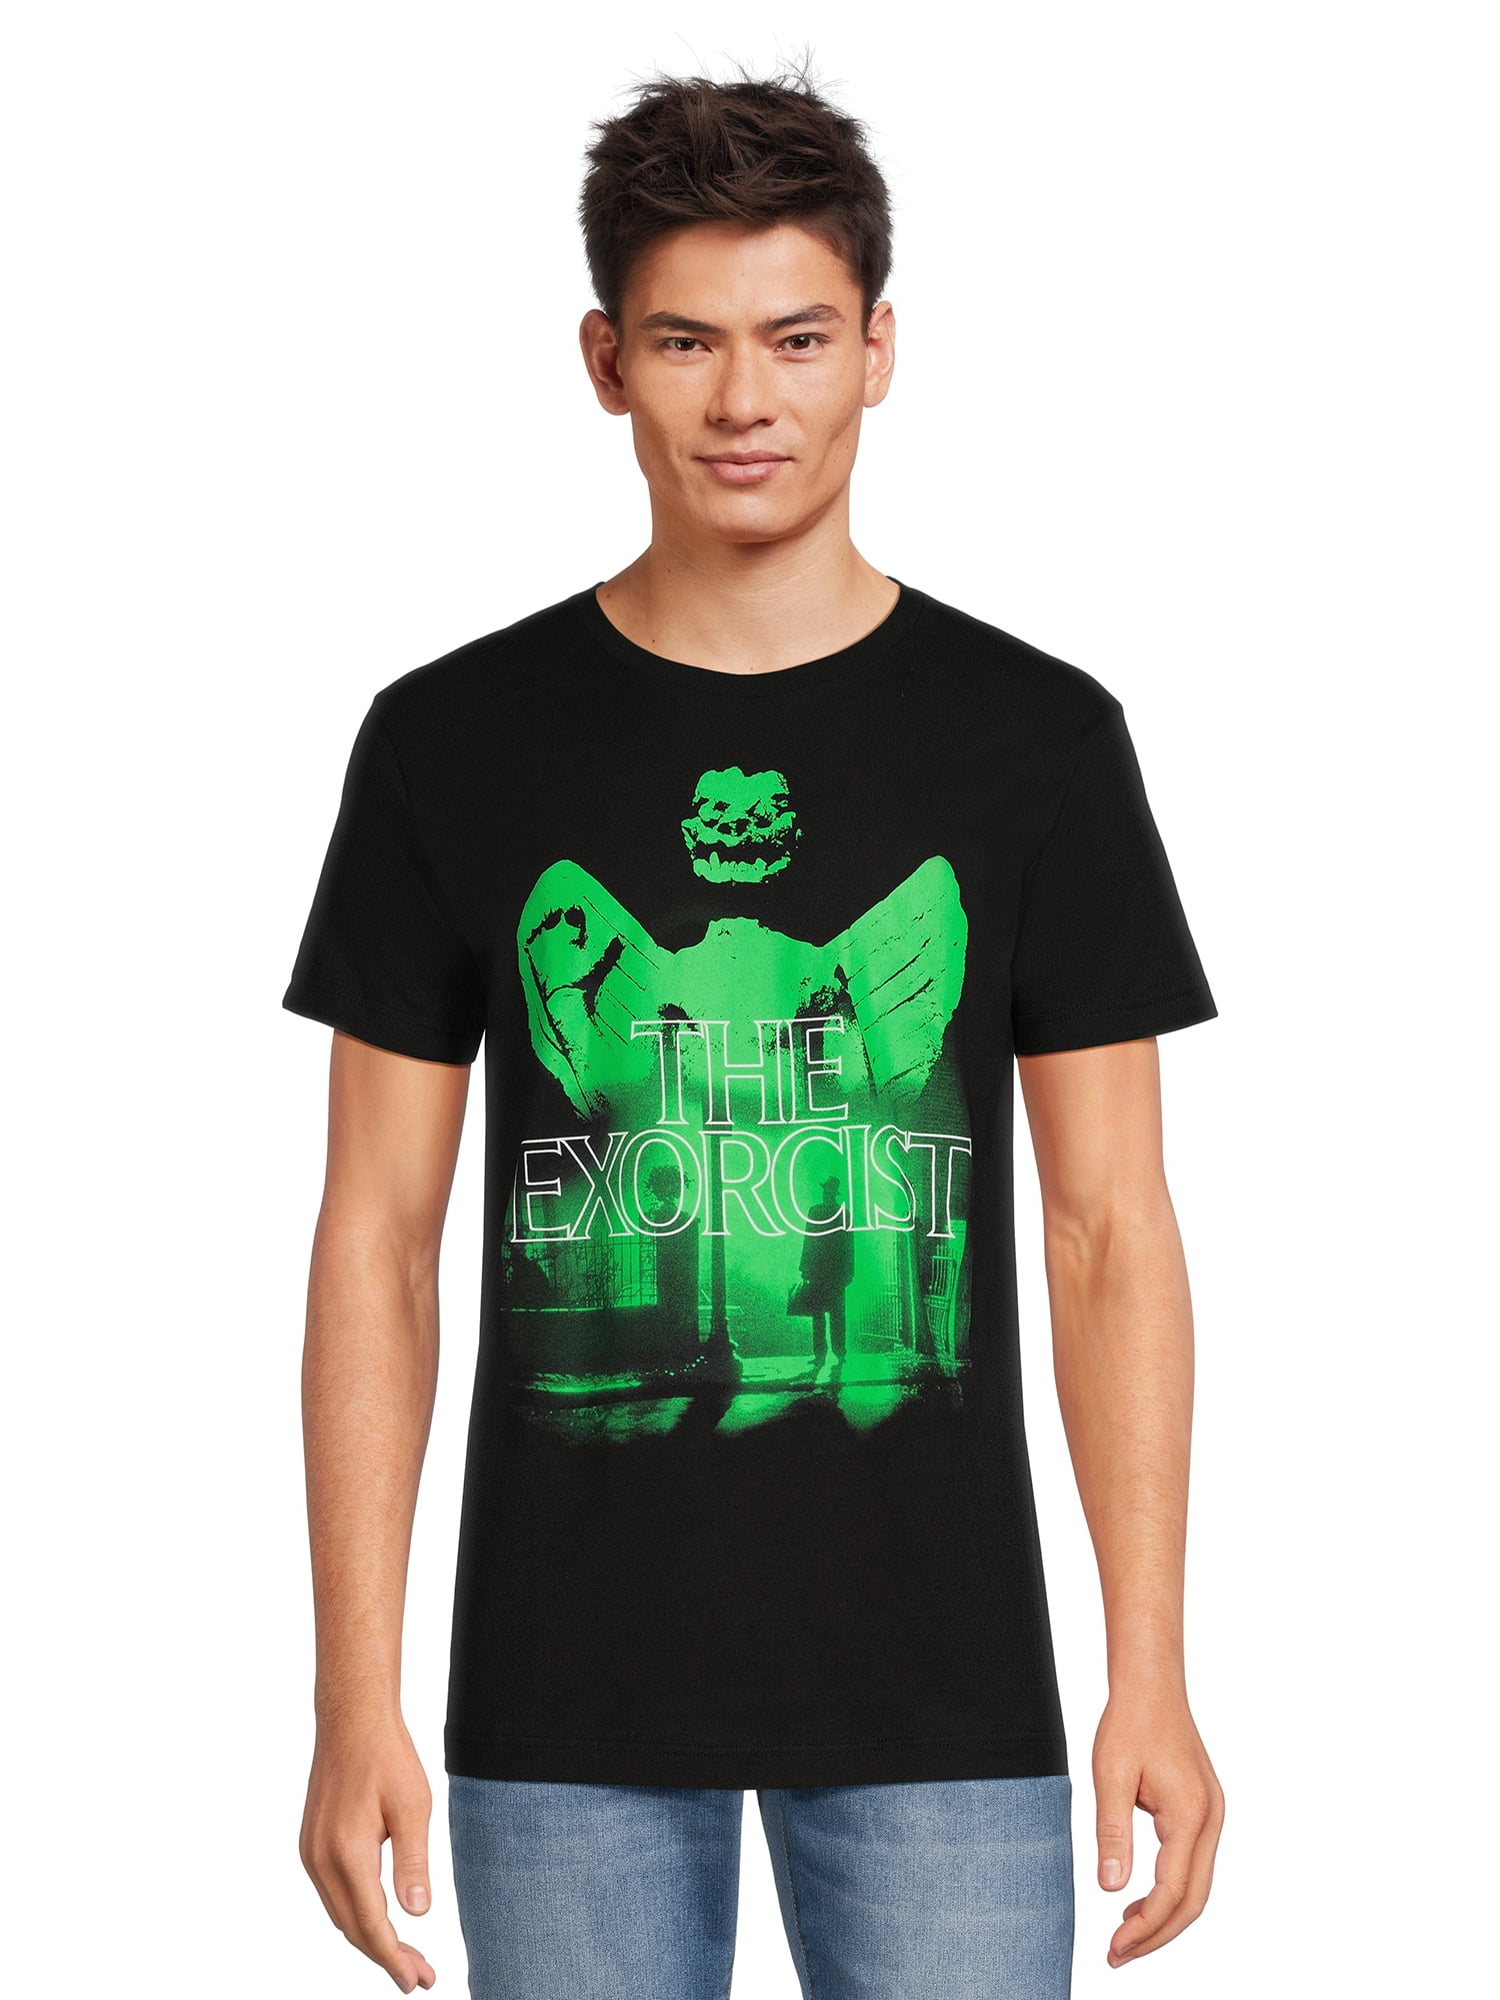 The Exorcist Men's and Big Men's Graphic T-Shirt, Sizes S-3XL